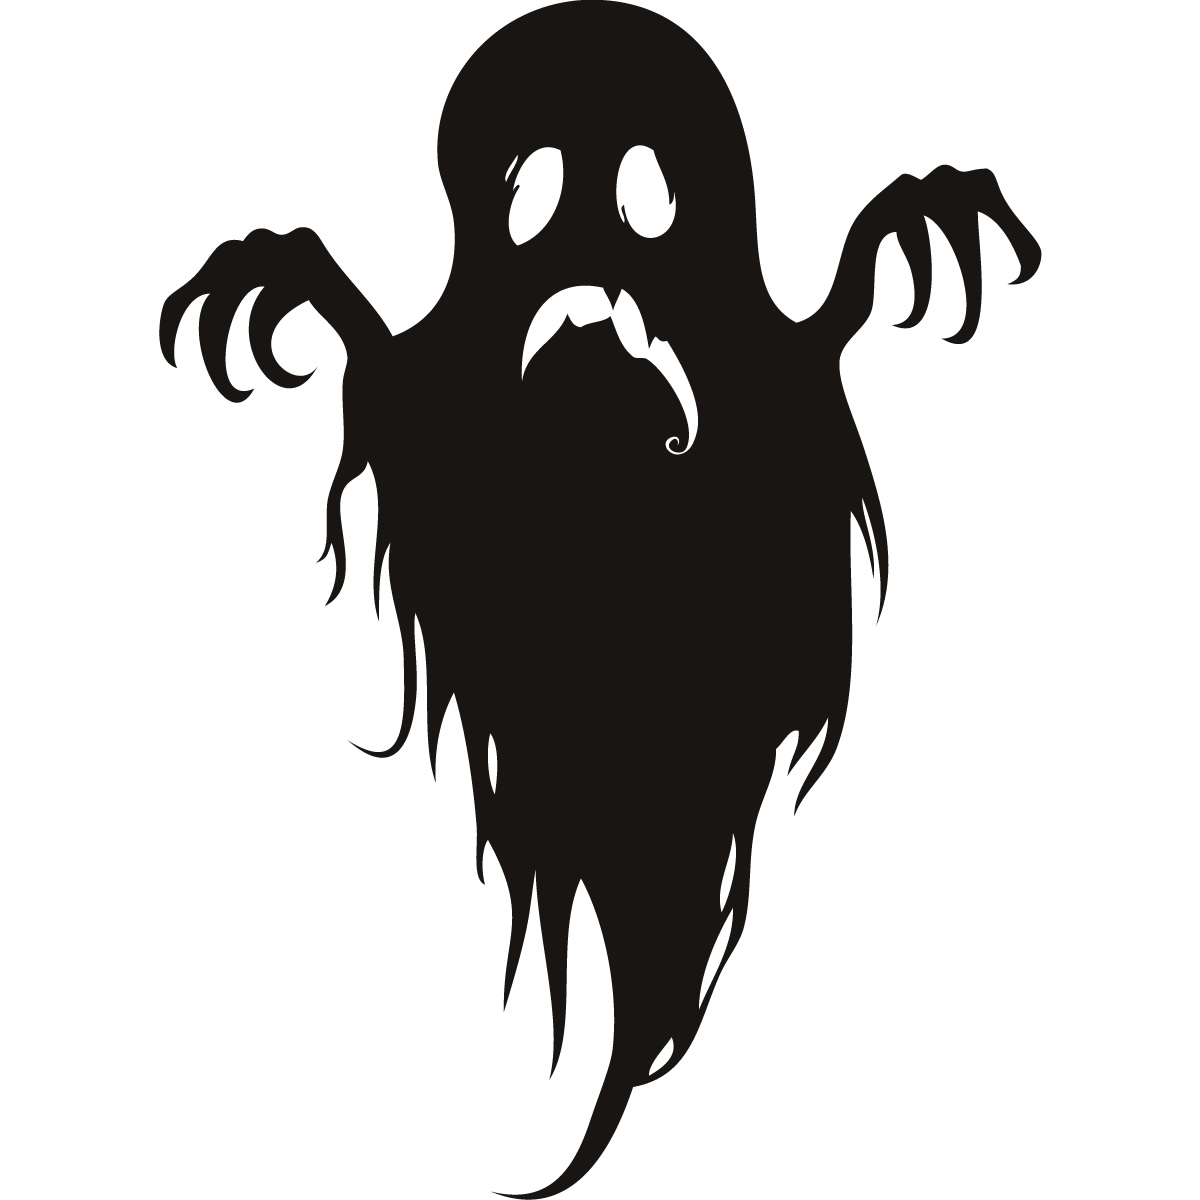 Scary Ghost Halloween Wall Art Stickers Wall Decal Transfers | eBay